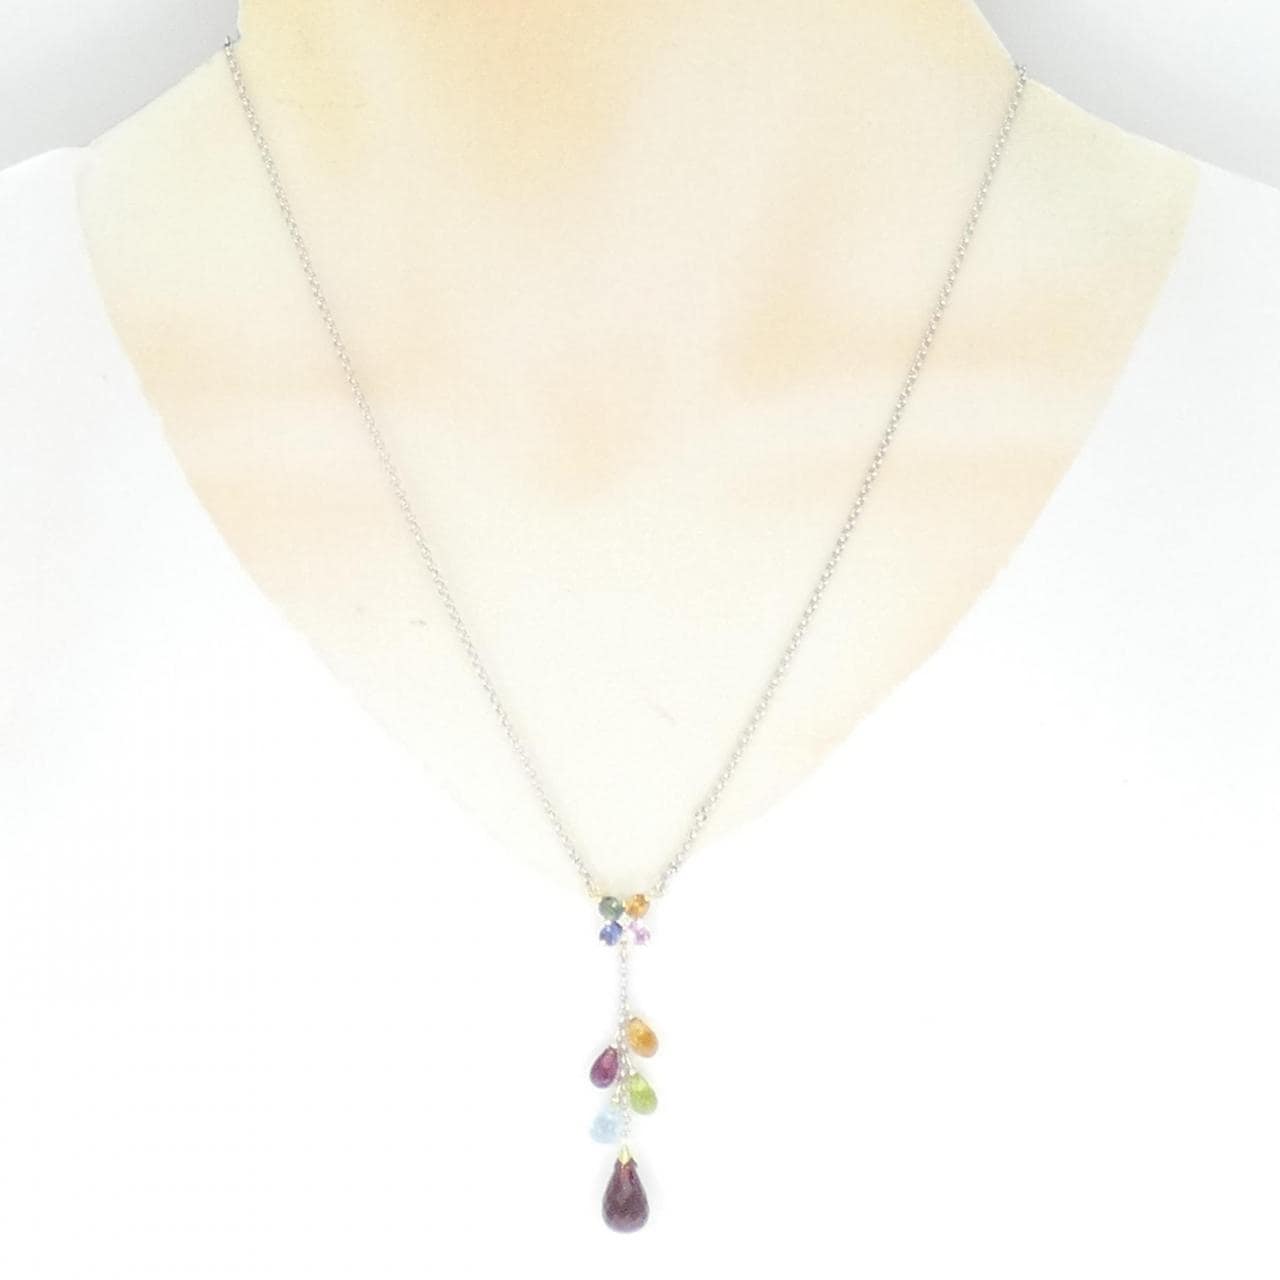 K18WG/K18YG colored stone necklace diffusion treatment not tested